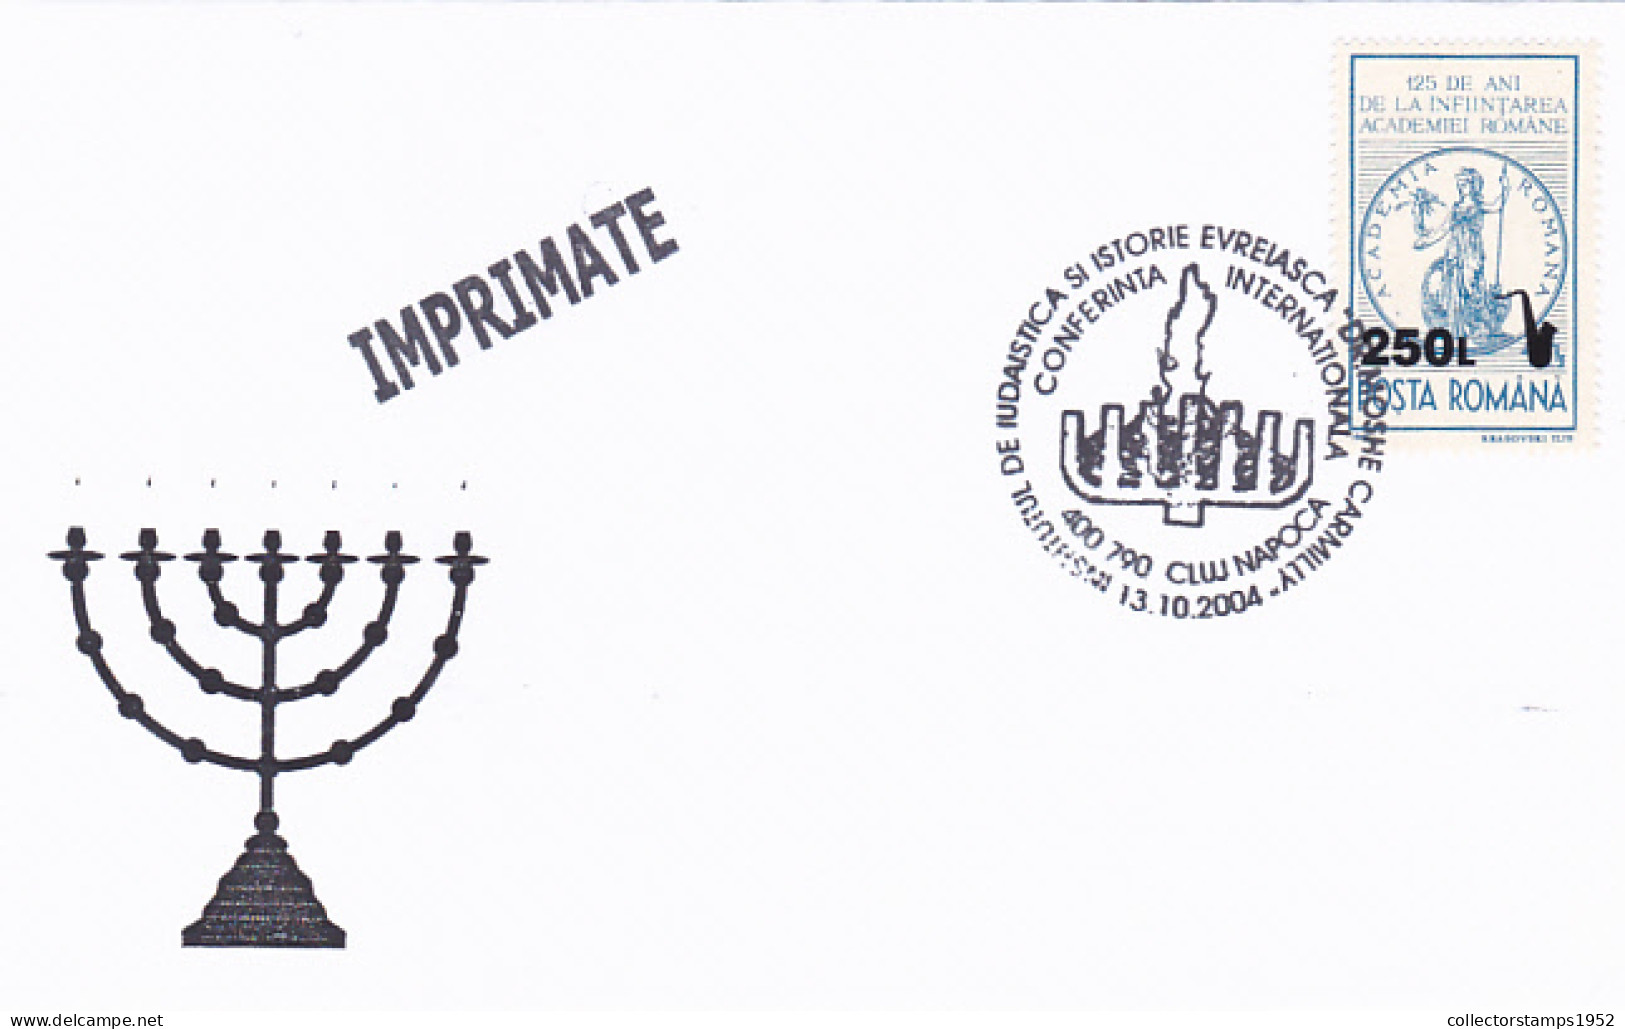 MOSHE CARMILLY JEWISH INSTITUTE, CONFERENCE, JEWISH, RELIGION, SPECIAL COVER, OVERPRINT STAMP, 2004, ROMANIA - Jewish